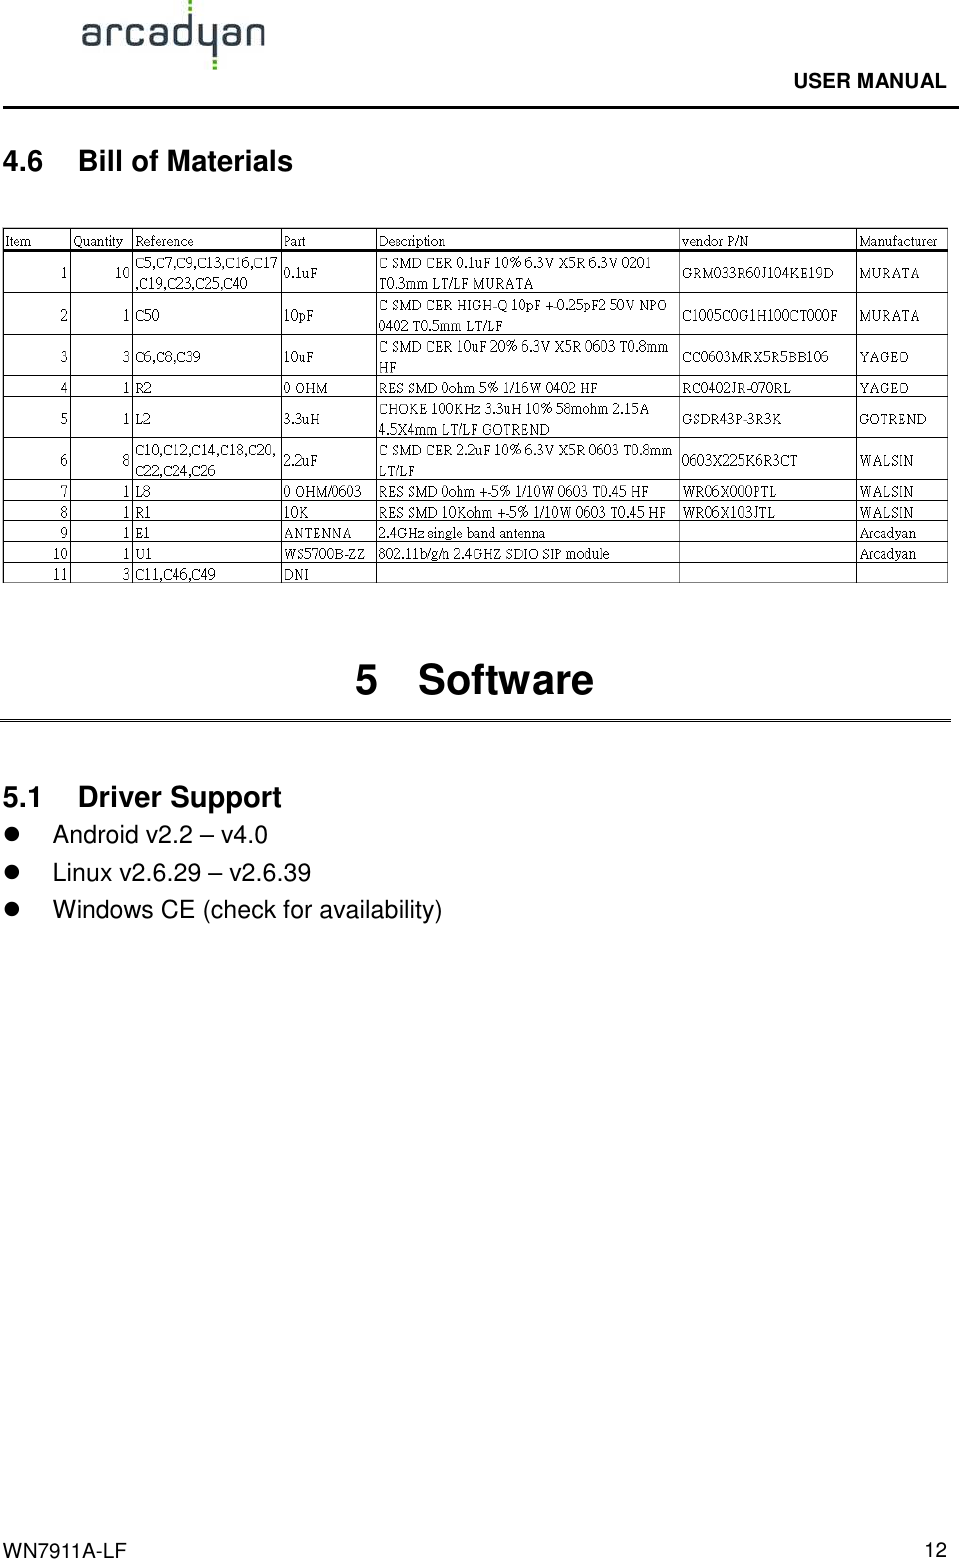                                              USER MANUAL                                              WN7911A-LF  124.6  Bill of Materials    5    Software  5.1  Driver Support   Android v2.2 – v4.0   Linux v2.6.29 – v2.6.39   Windows CE (check for availability)        